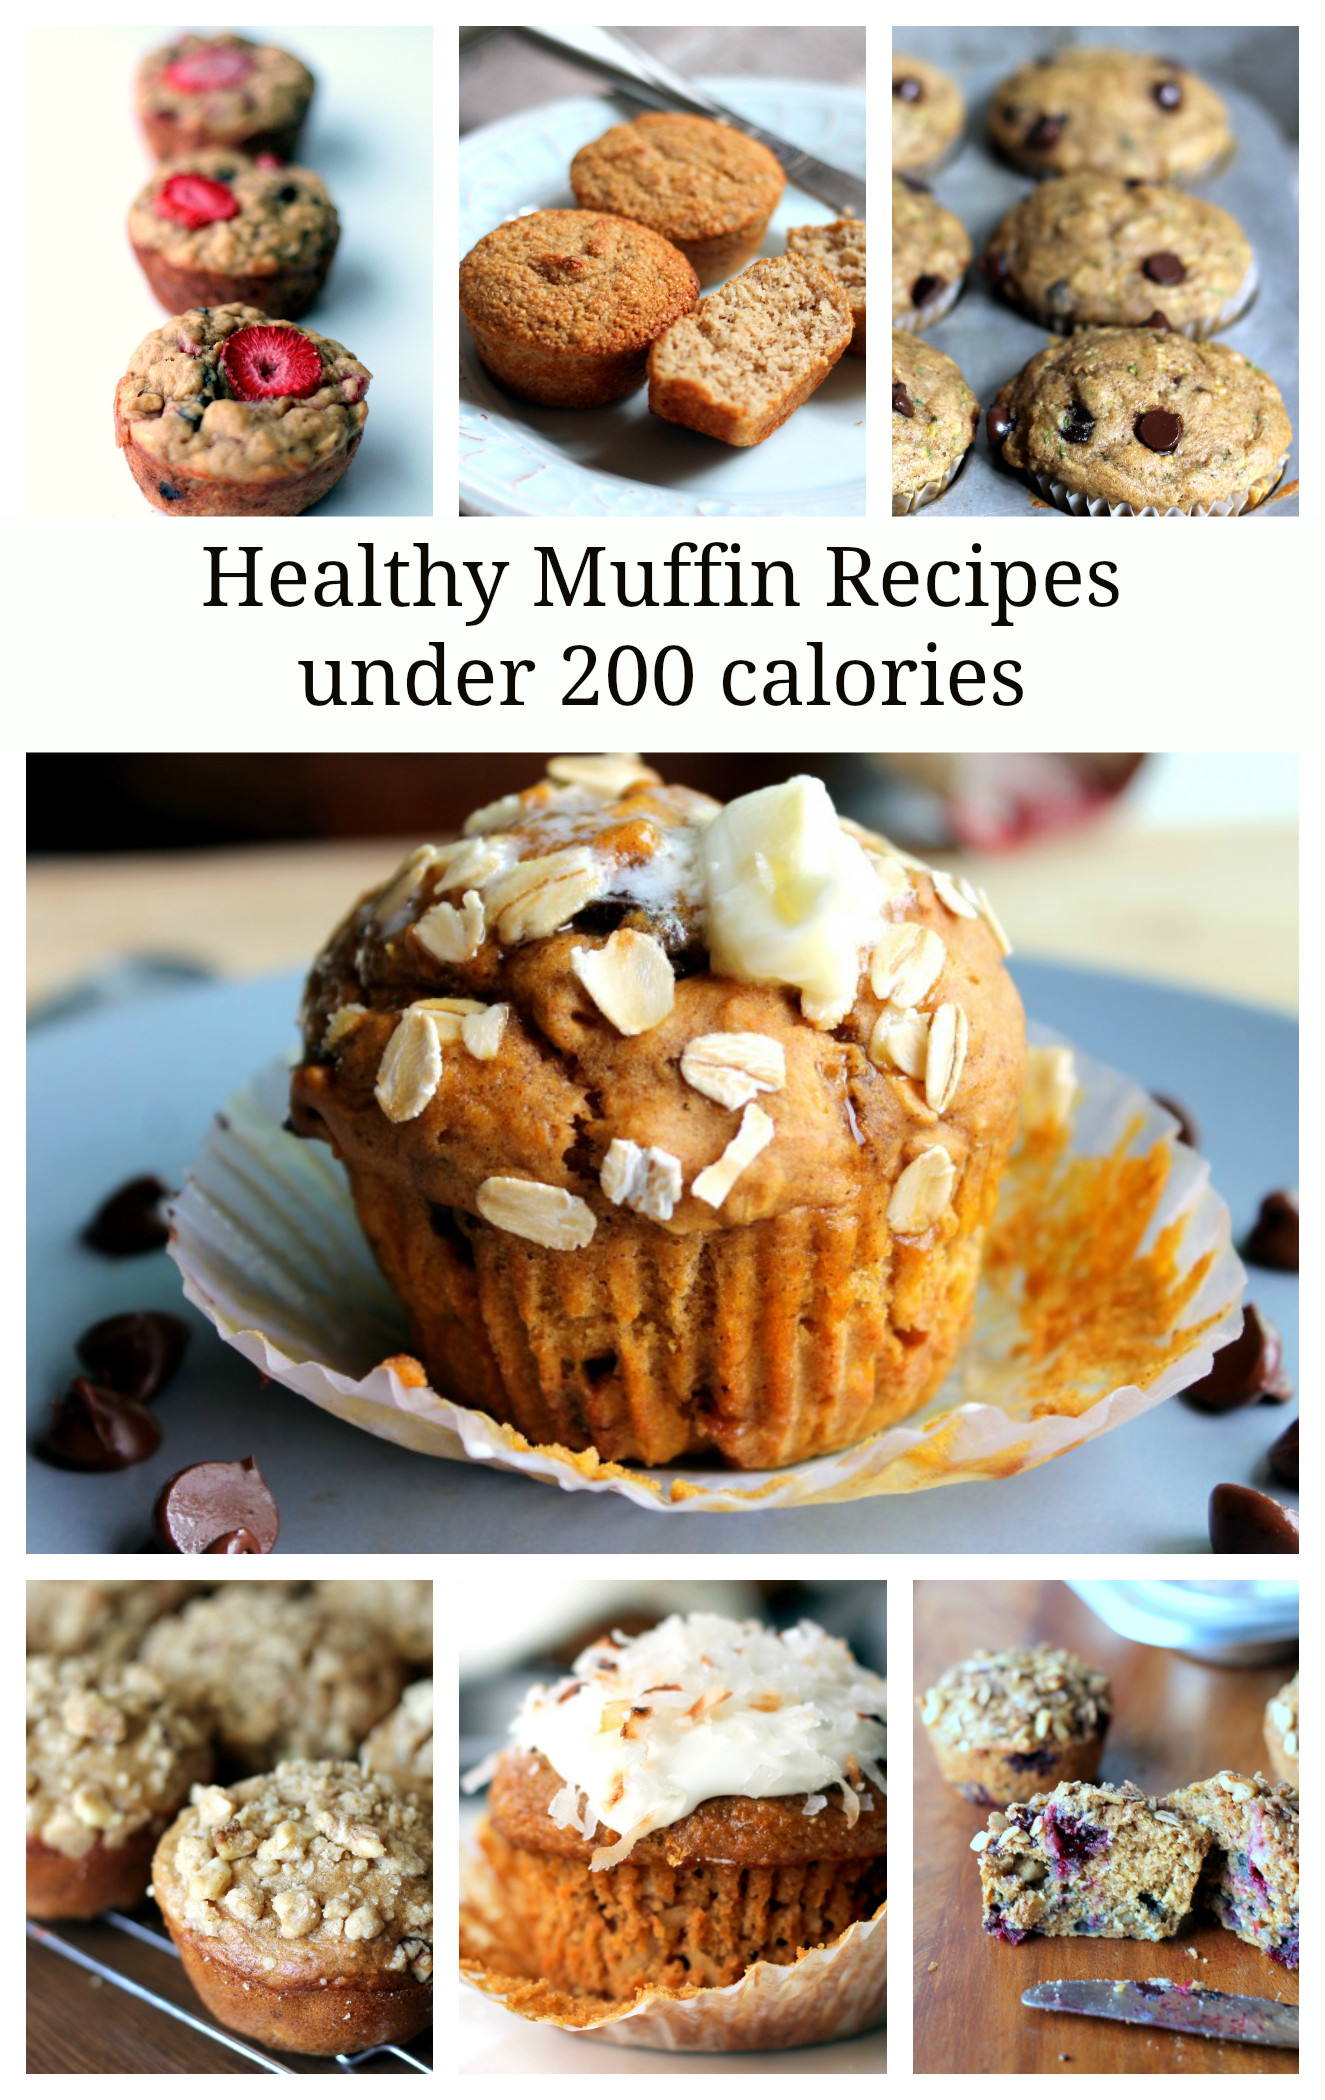 Low Calorie Muffin Recipes
 7 Healthy Muffin Recipes Under 200 Calories